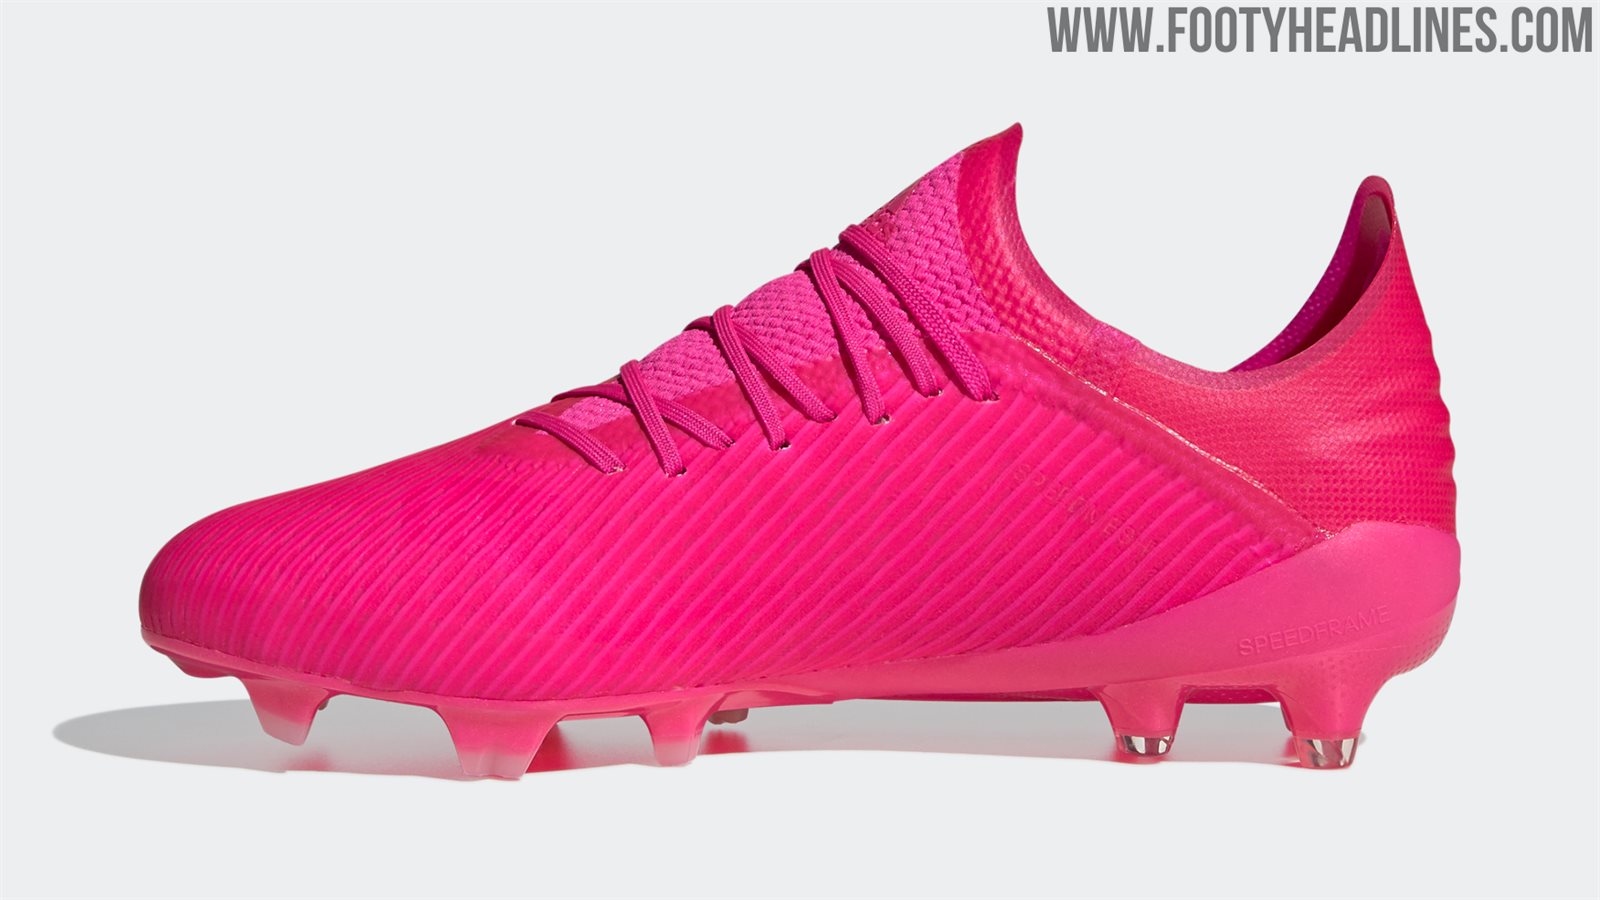 Release Postponed: 'Triple Pink' Adidas X 19+ 'Locality Pack' Boots ...